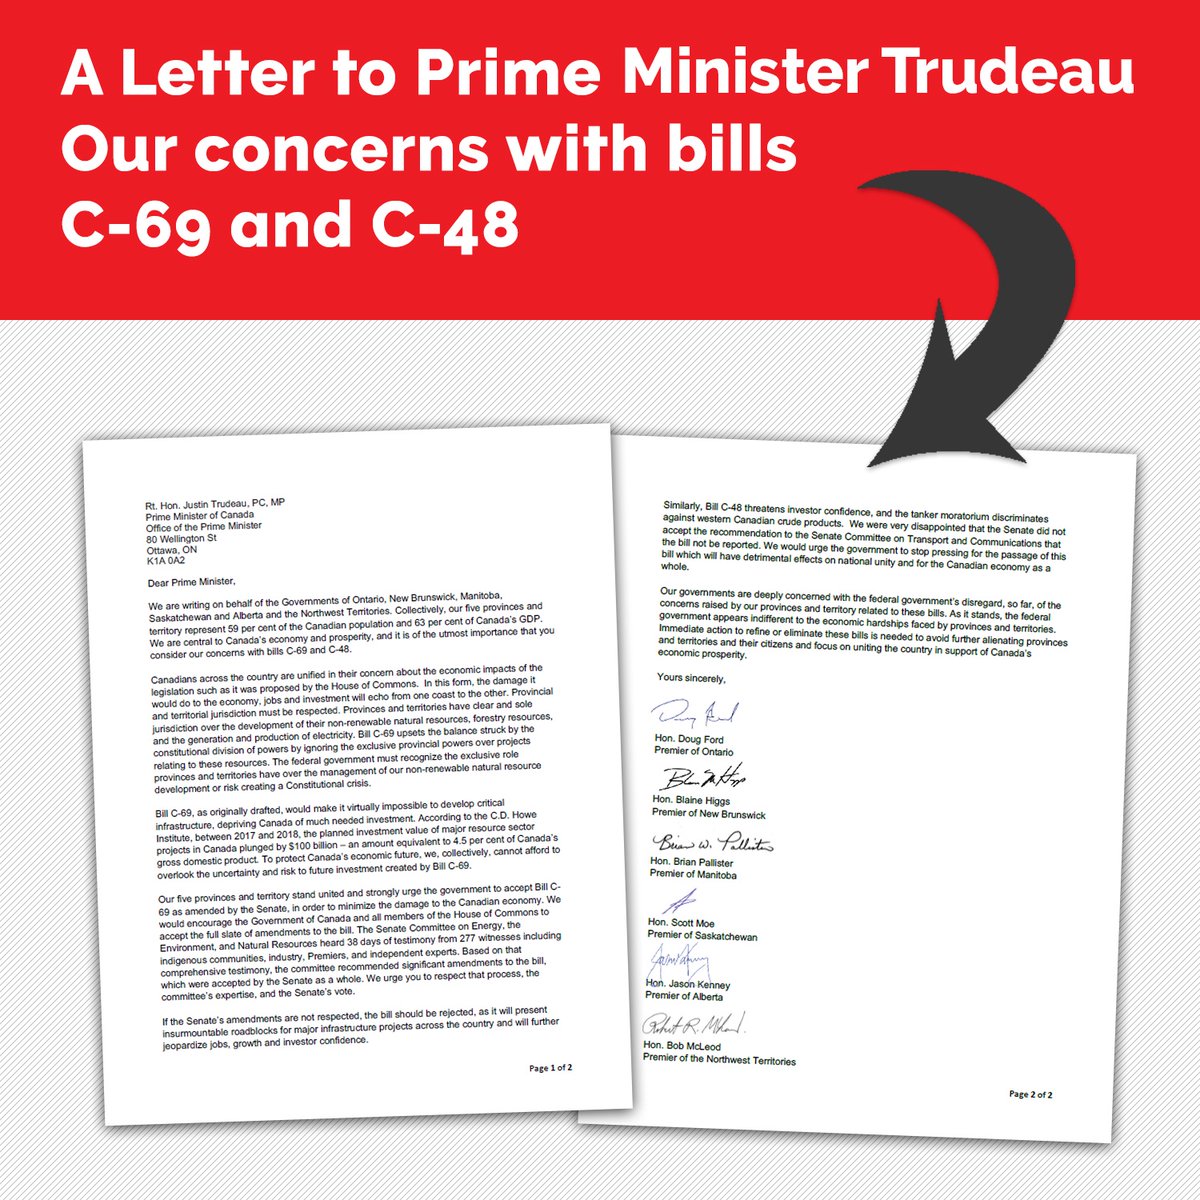 Premiers Issue Joint Letter to Prime Minister